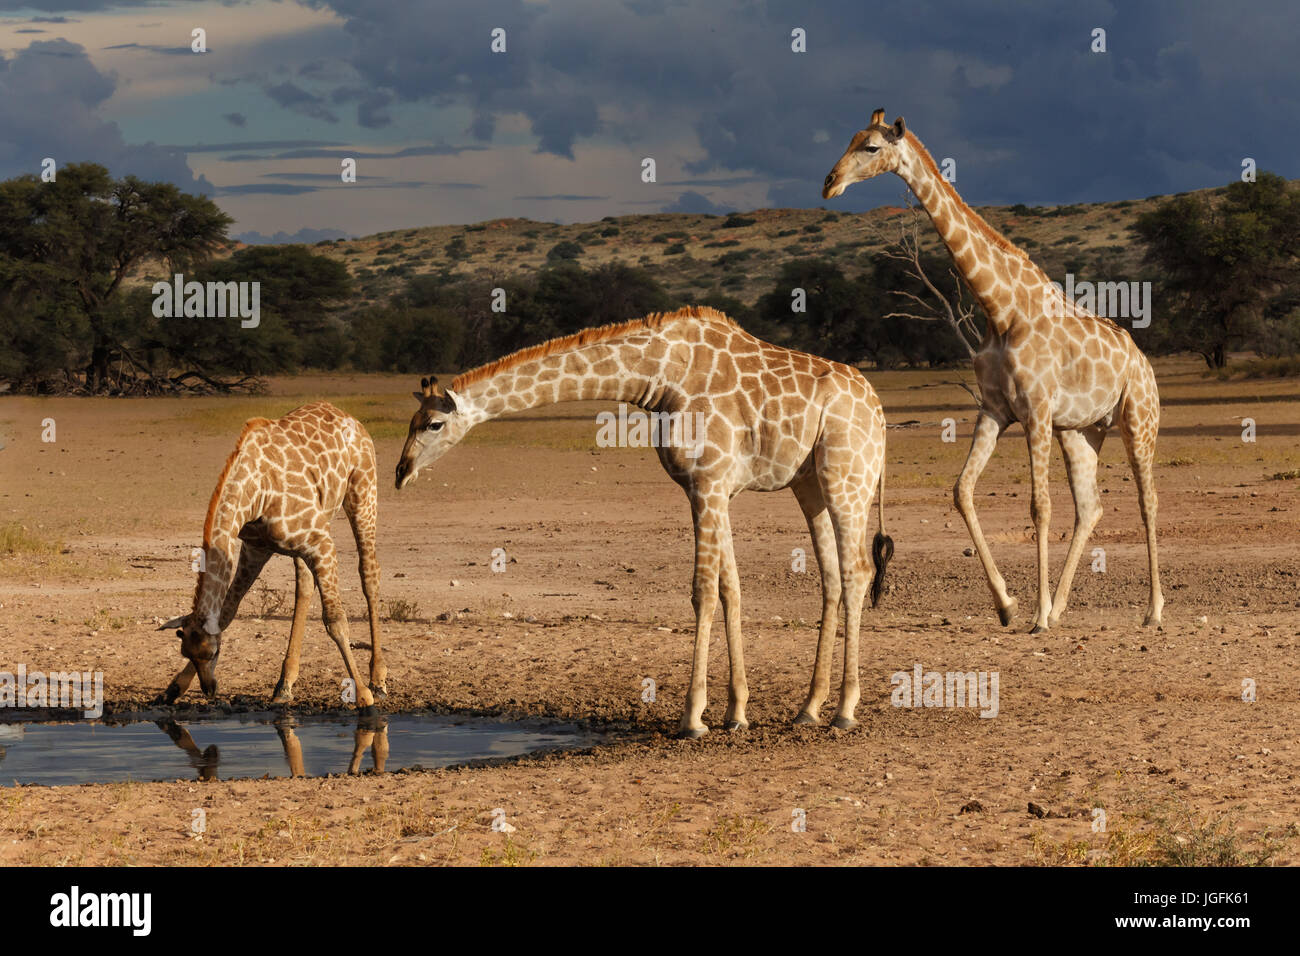 Giraffe ,Giraffa camelopardalis, . A very long neck with long legs with a rich brown patchy coat has to spread its front legs to drink Stock Photo